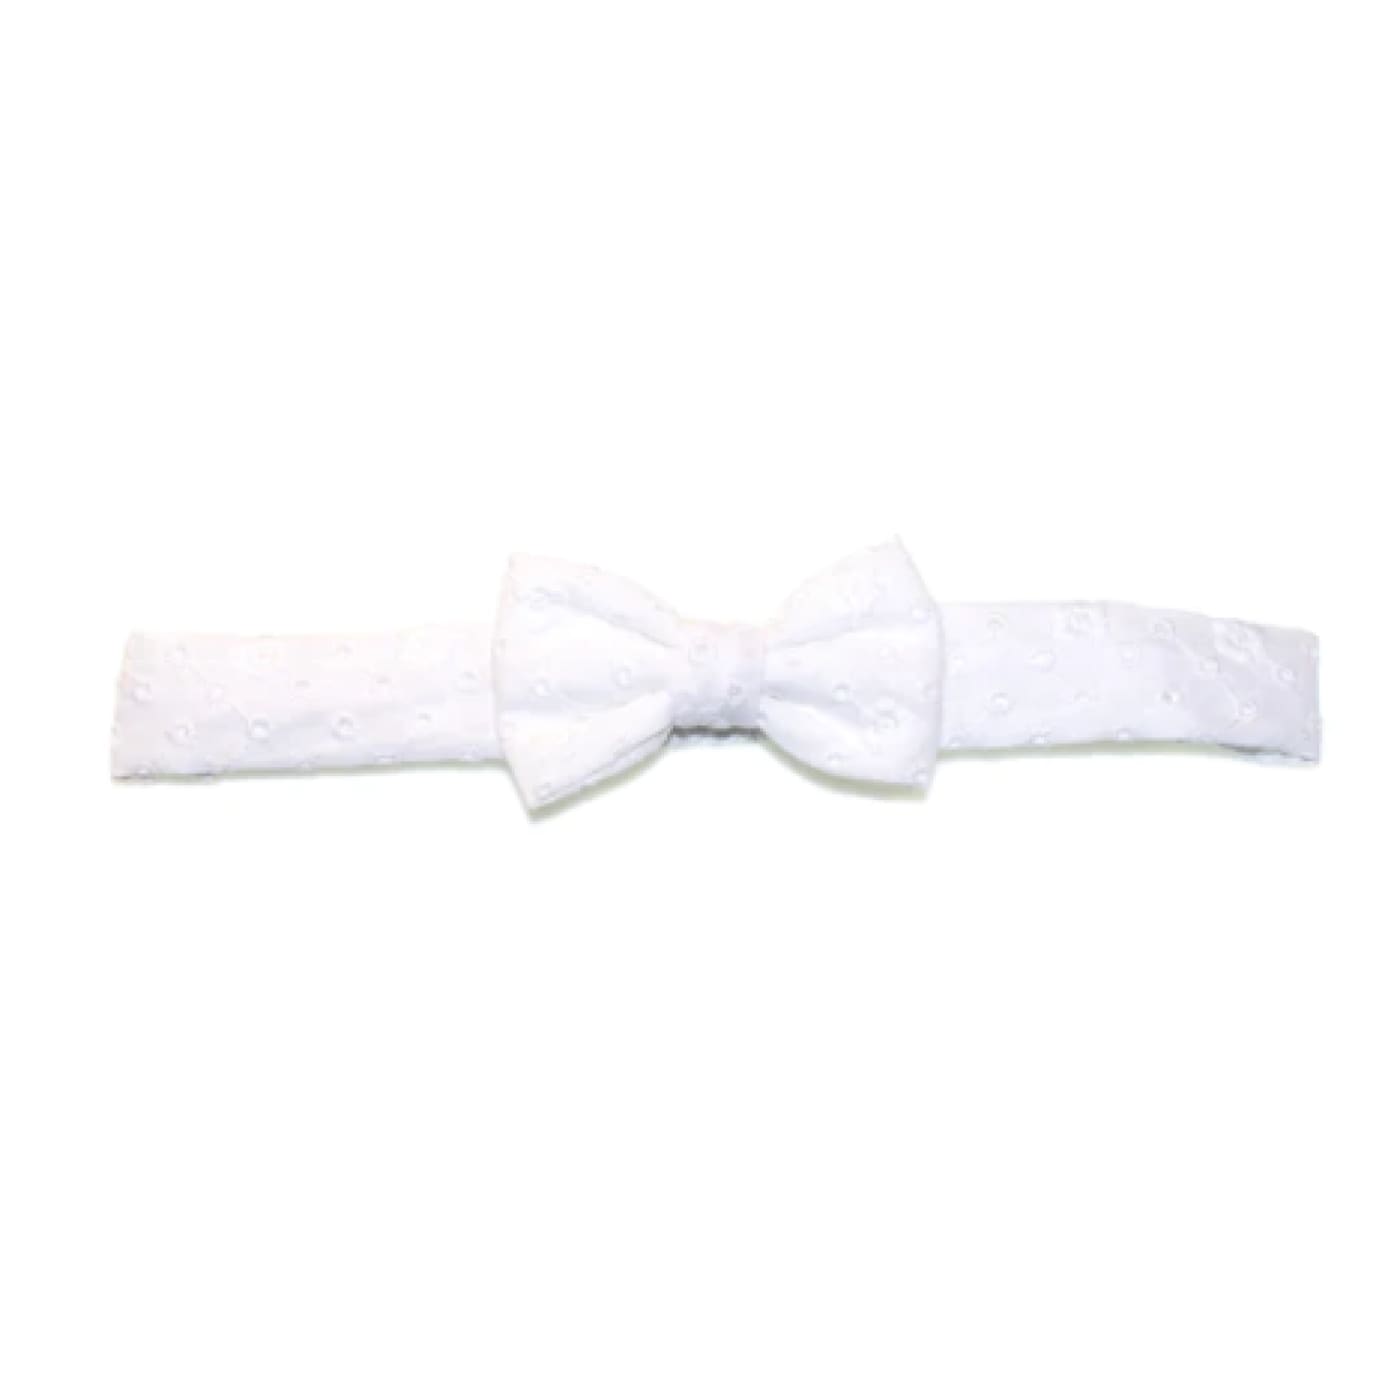 Goody Gumdrops Baby Broderie Anglaise Bow Headband - White - White - BABY & TODDLER CLOTHING - HEADBANDS/HAIR CLIPS